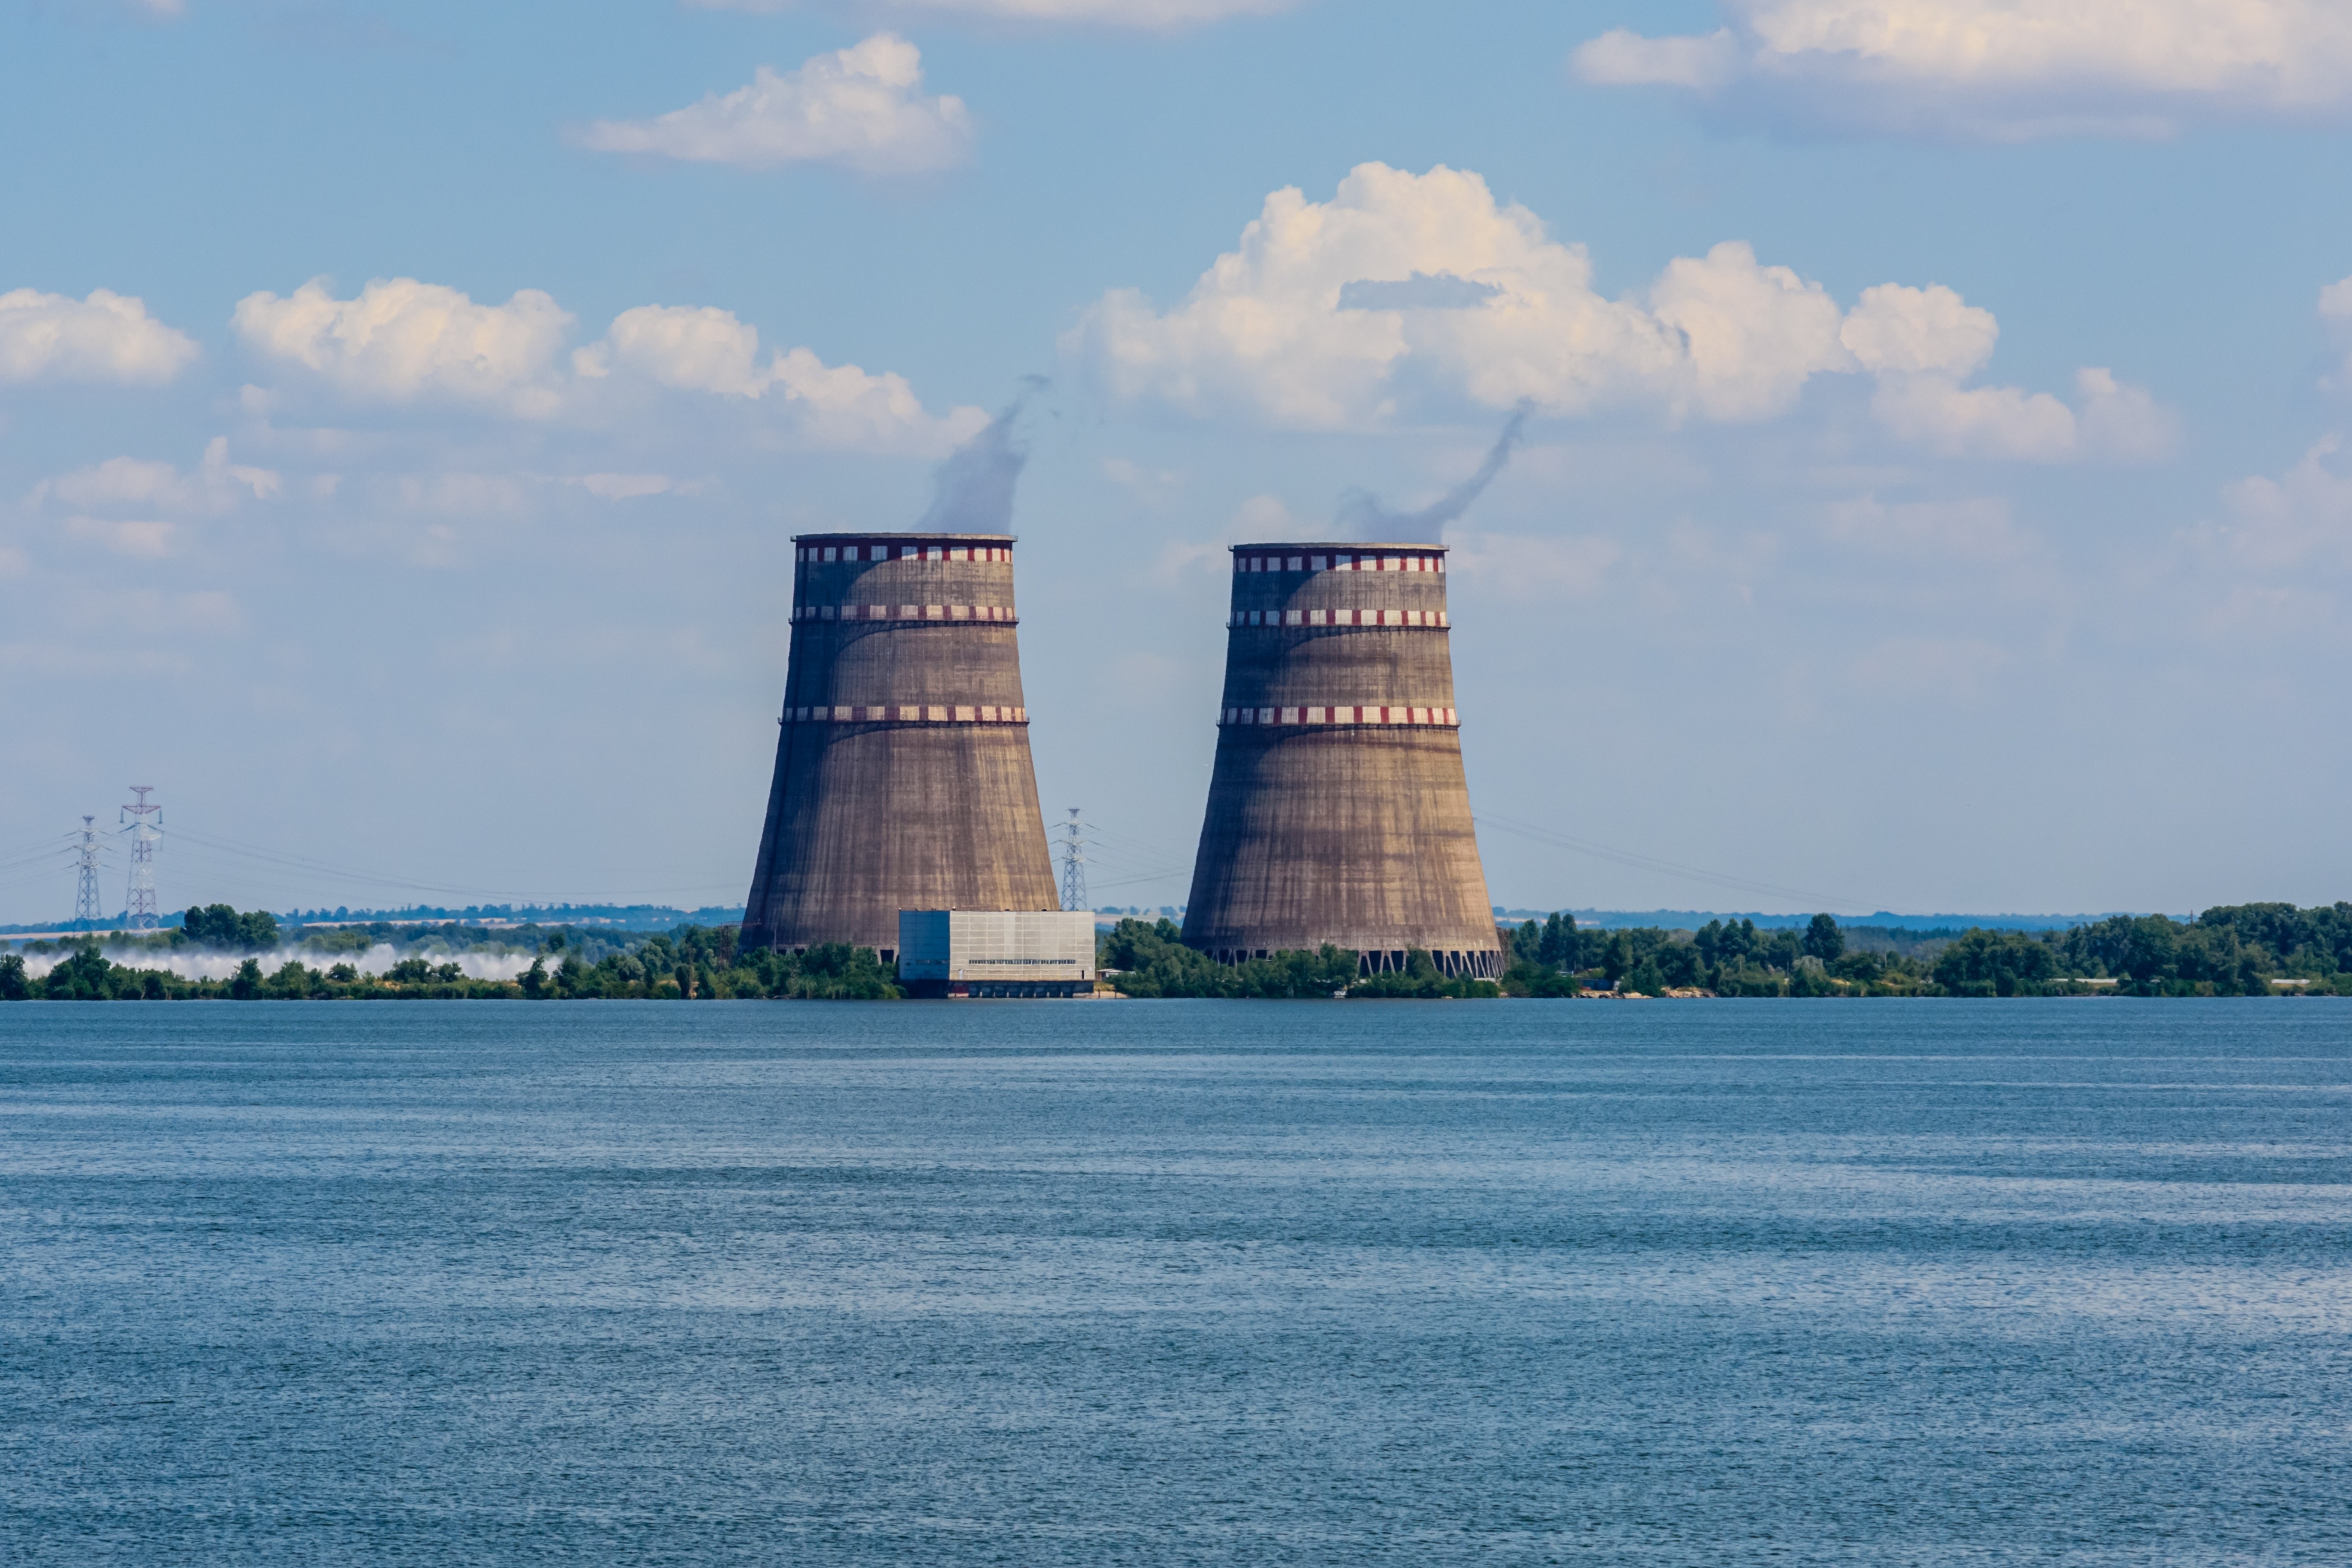 Europe's Biggest Nuclear Plant In Ukraine Faces 'Very High' Risk From Russian Shelling: Report